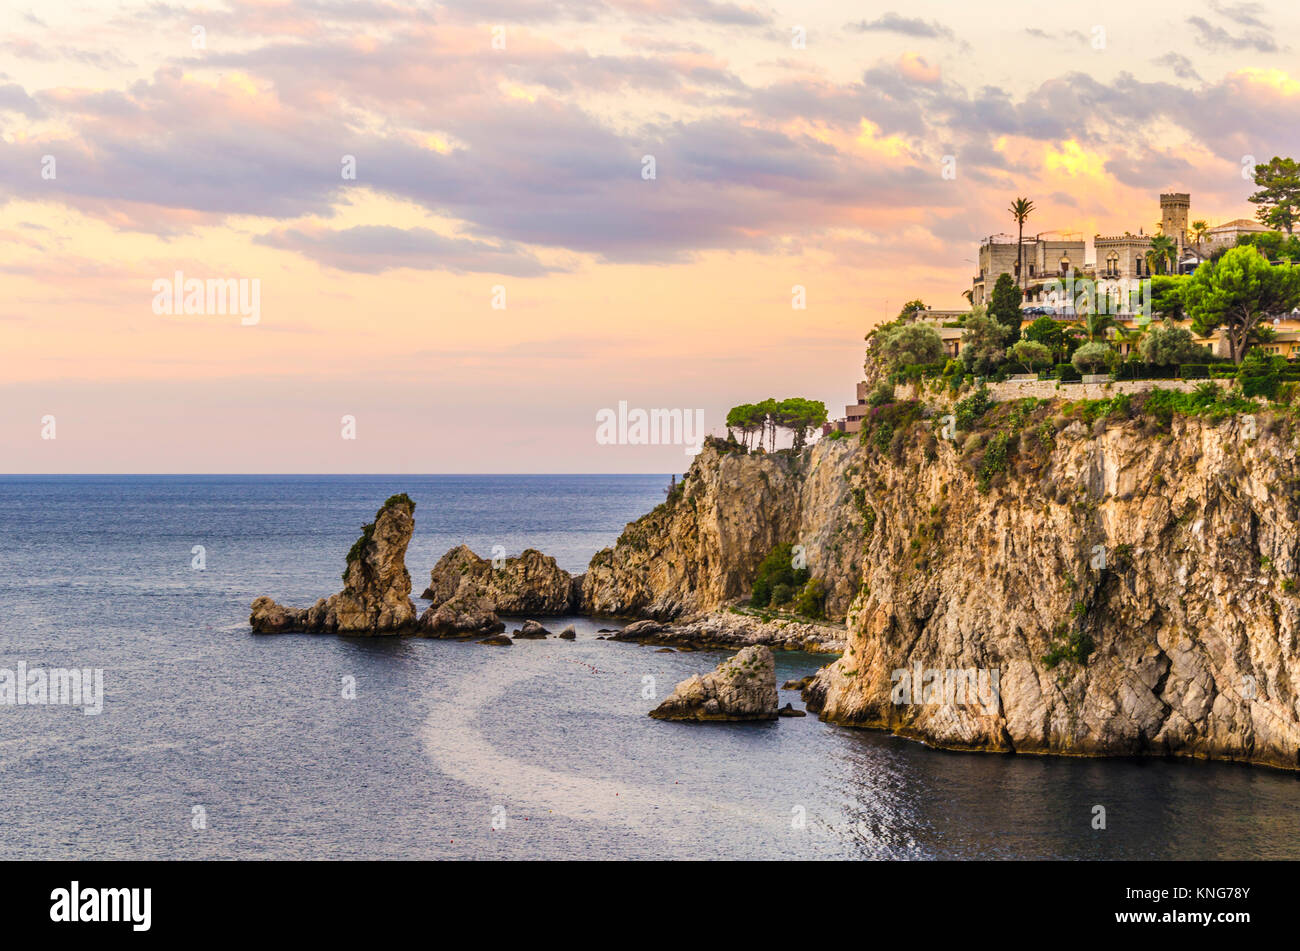 Sunset landscape on the sicilian coast farallones at the height of the town of tahormina italy Stock Photo